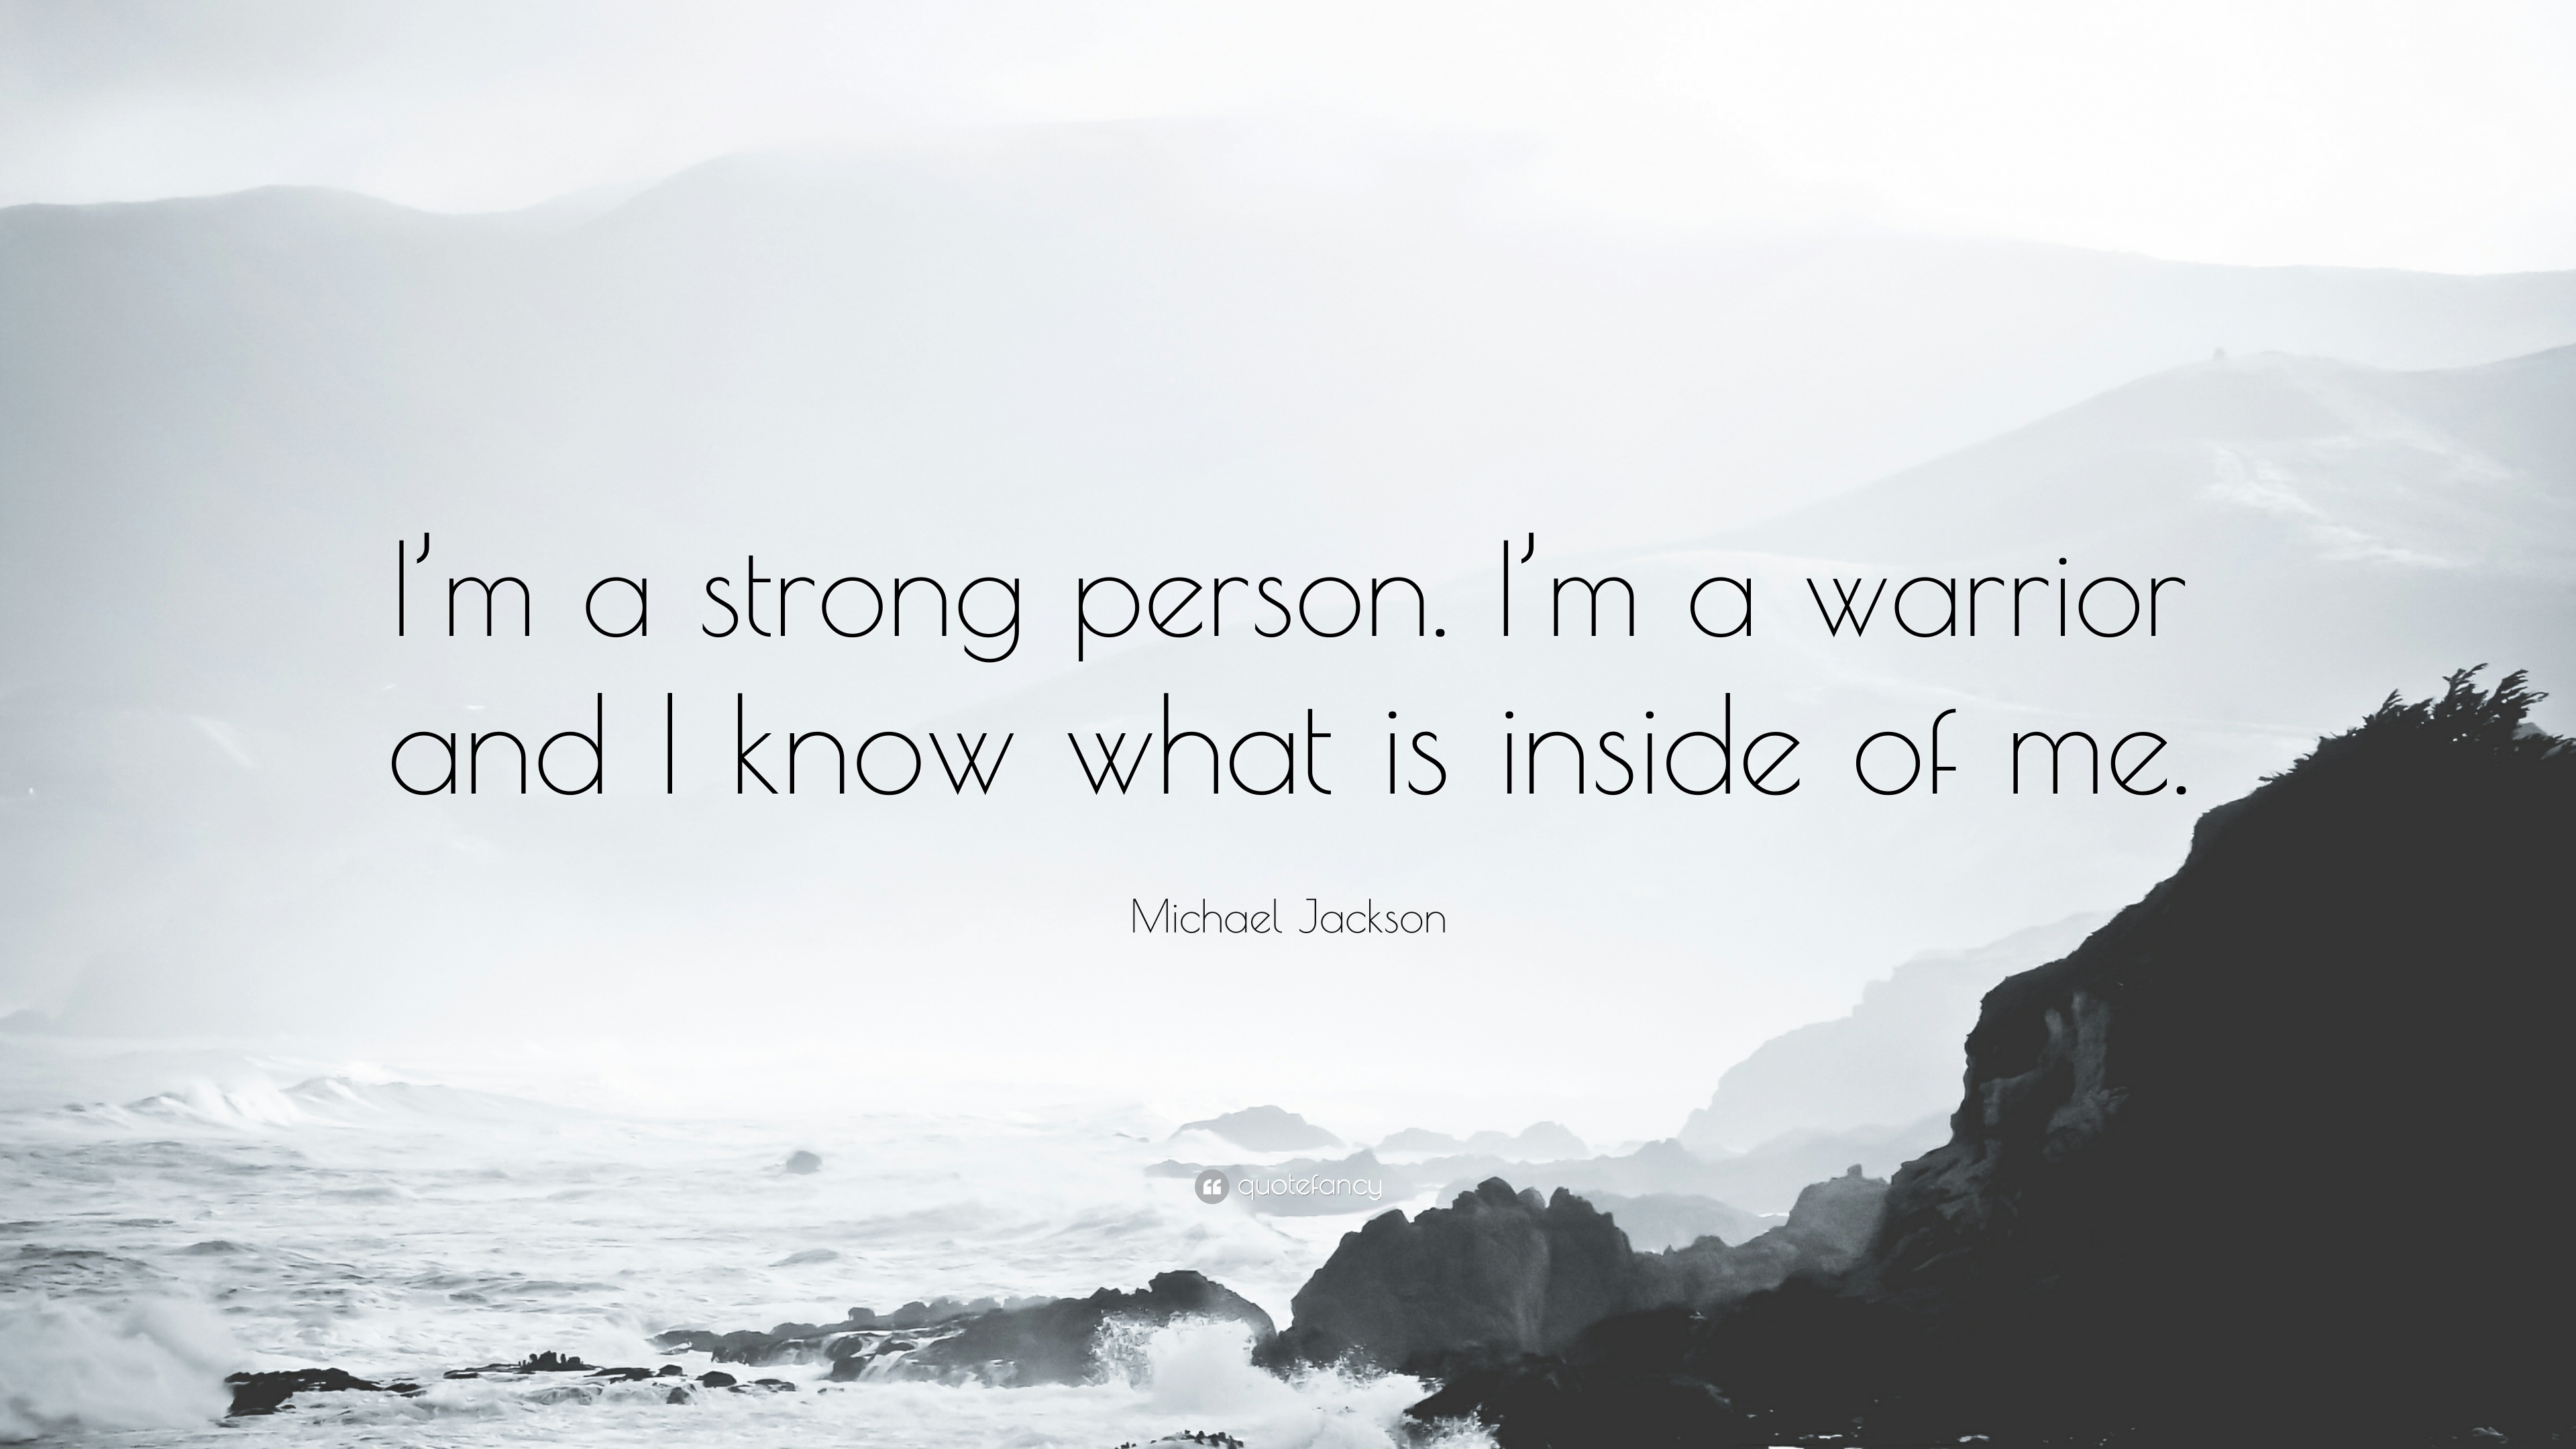 Michael Jackson Quote: “I'm a strong person. I'm a warrior and I ...